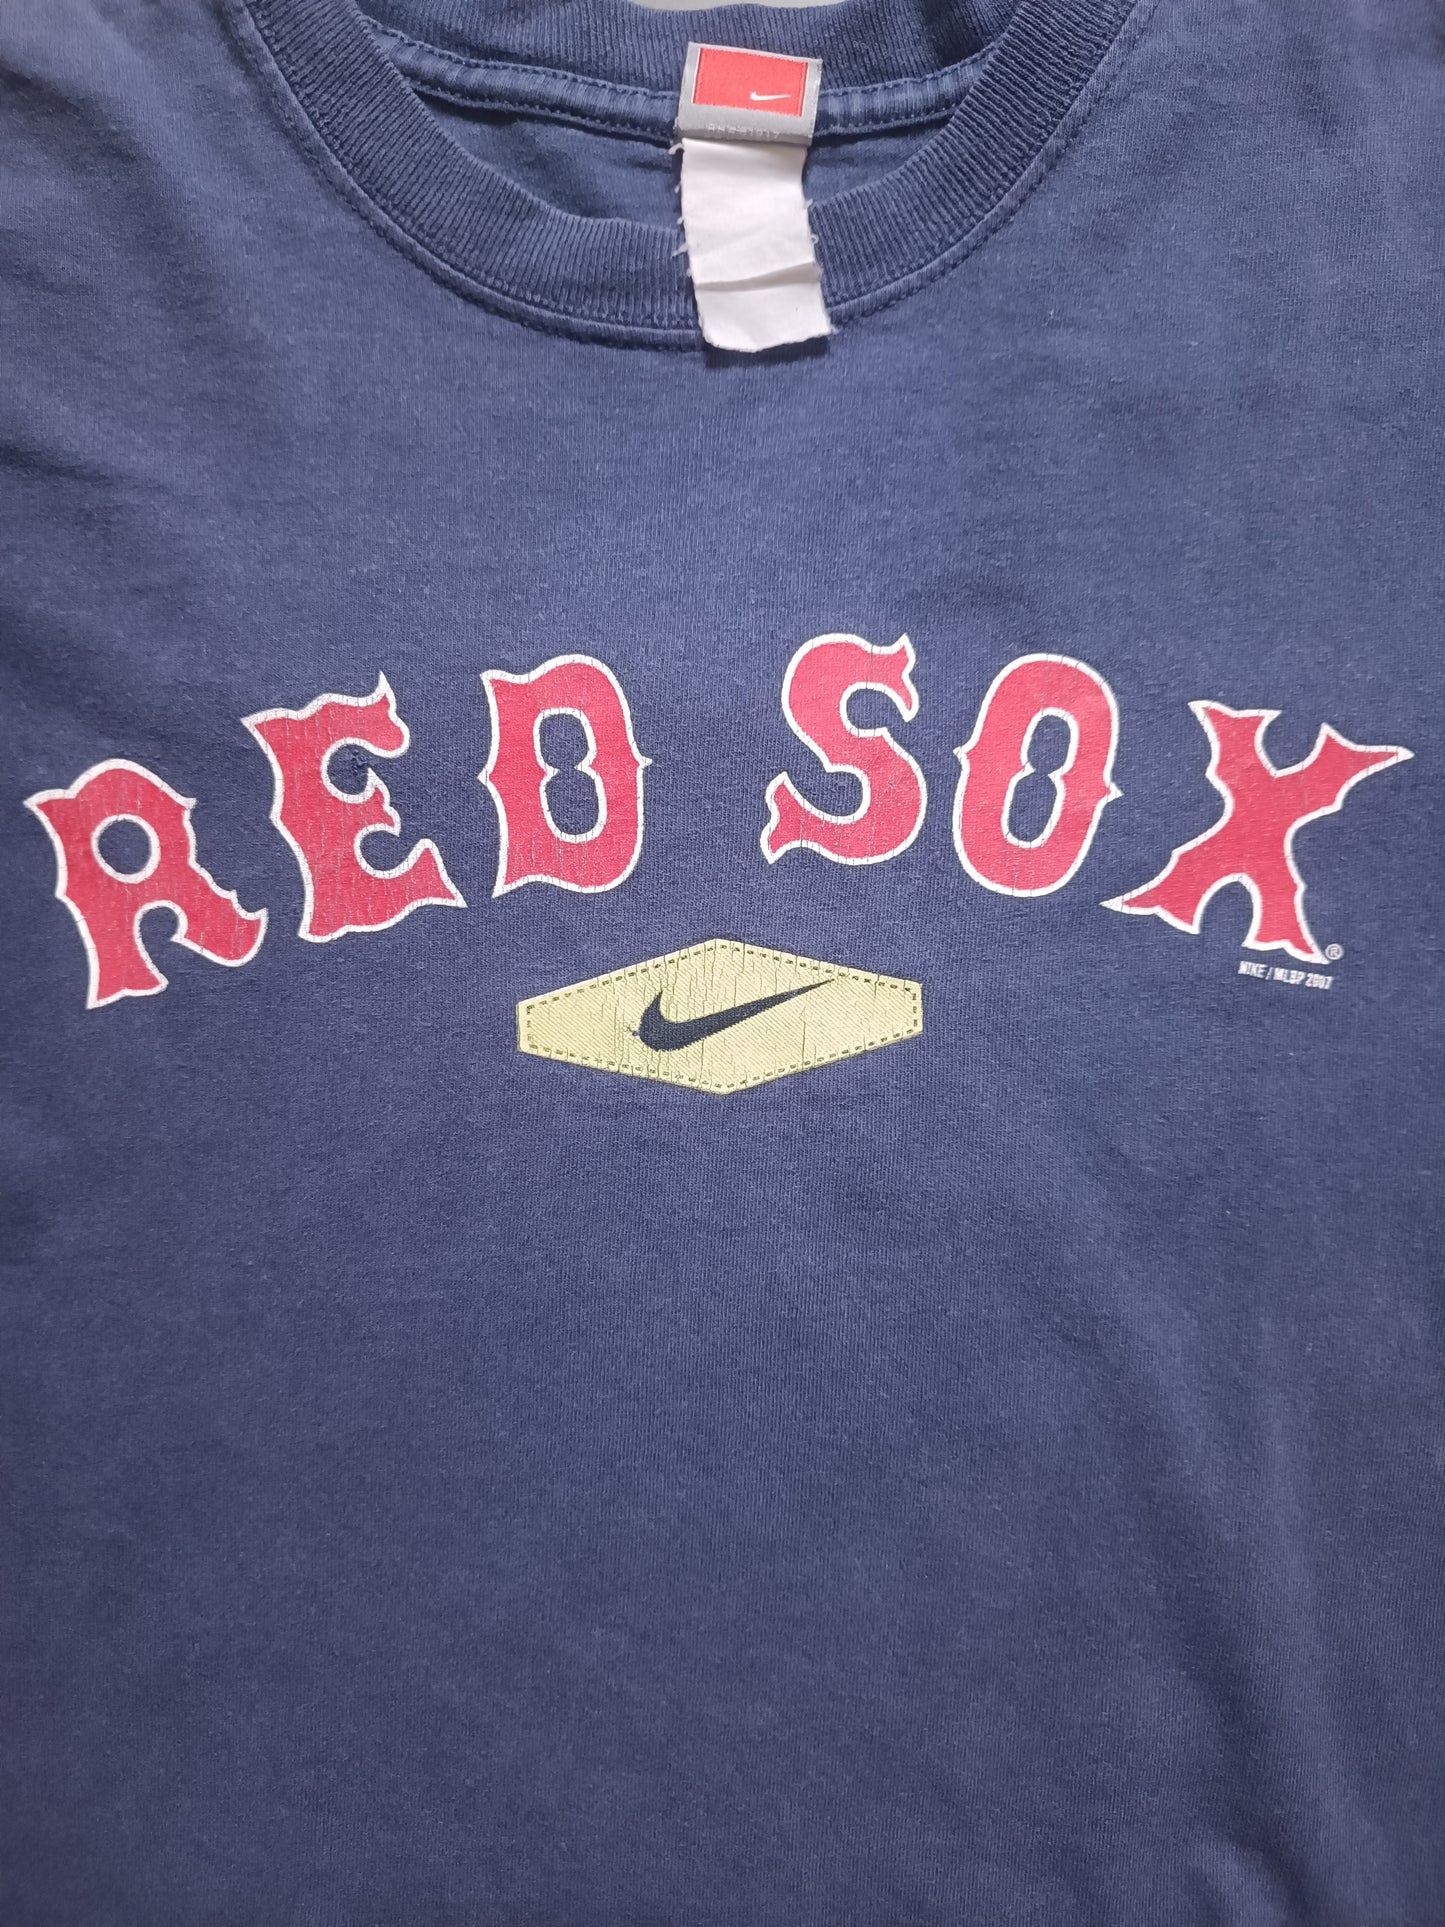 Nike Red Sox - M